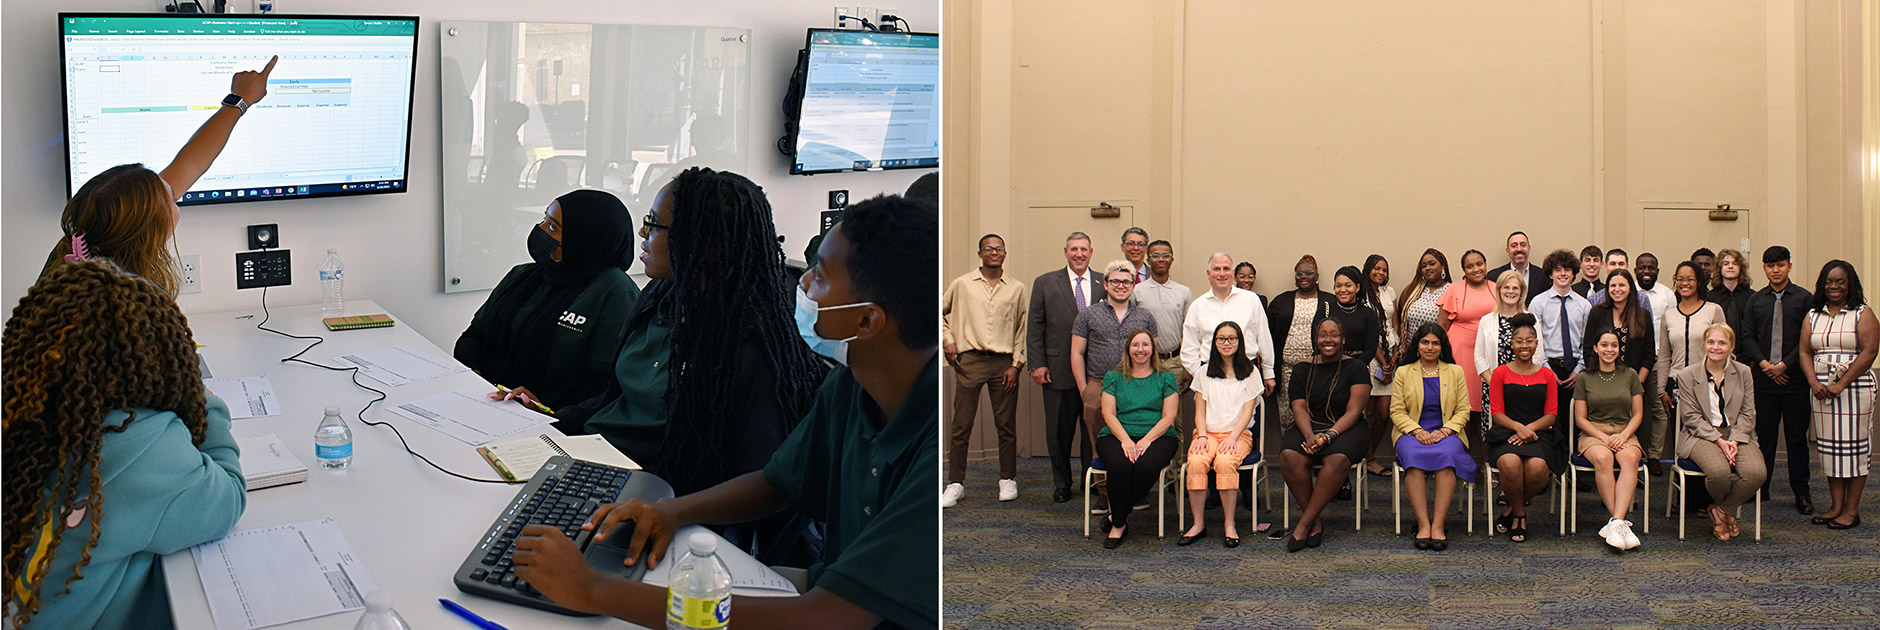 Pictured is a class in the ACAP seminar and a recent ACAP class.